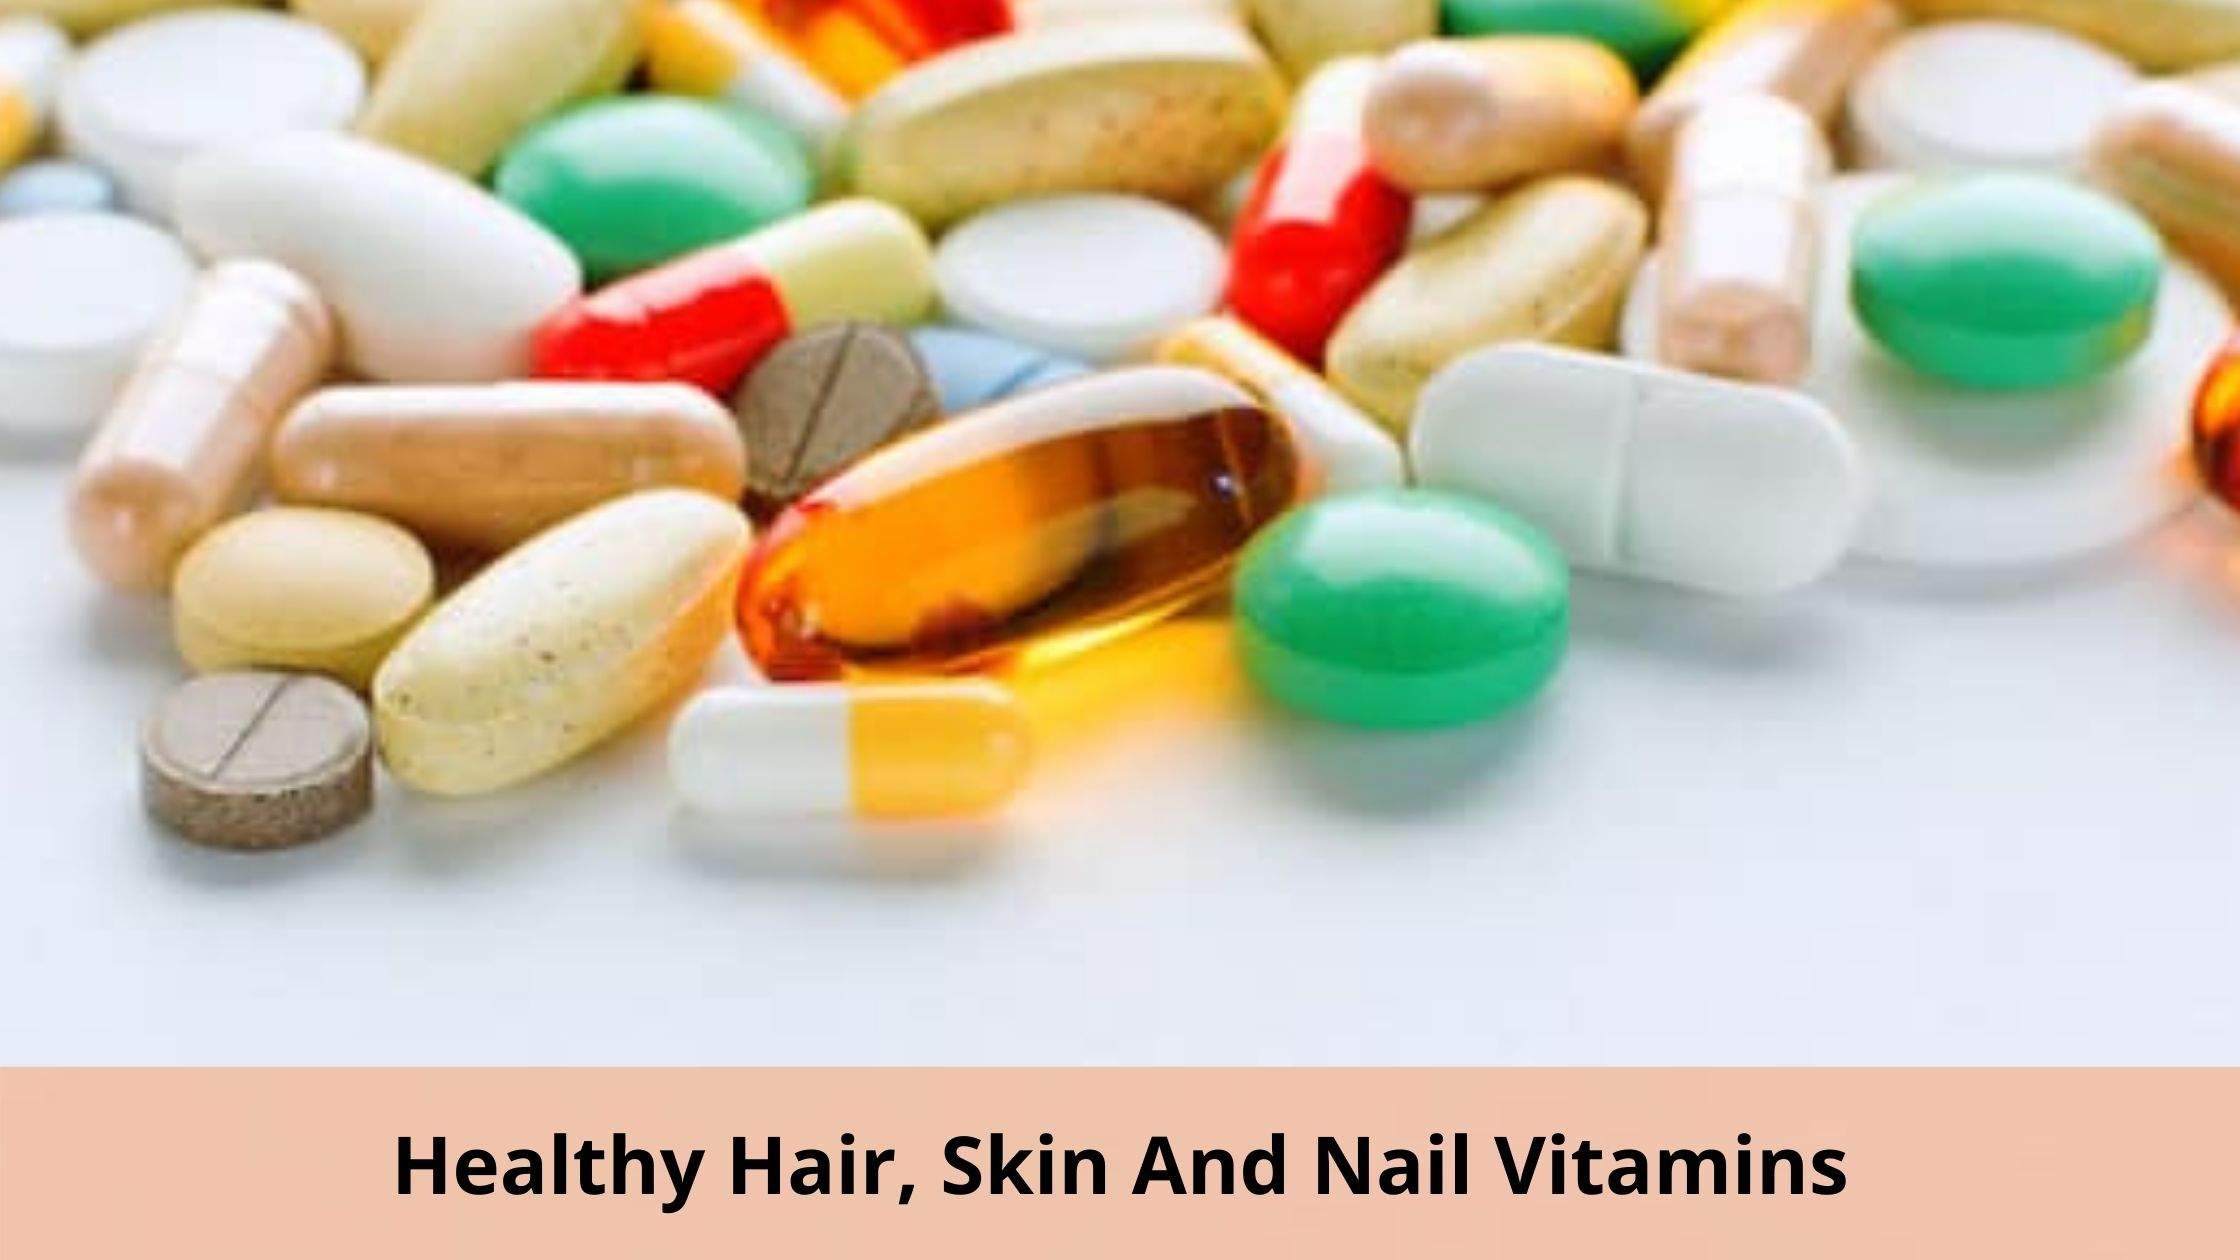 Consider These Nutritional Tips For Healthy Hair, Skin And Nail